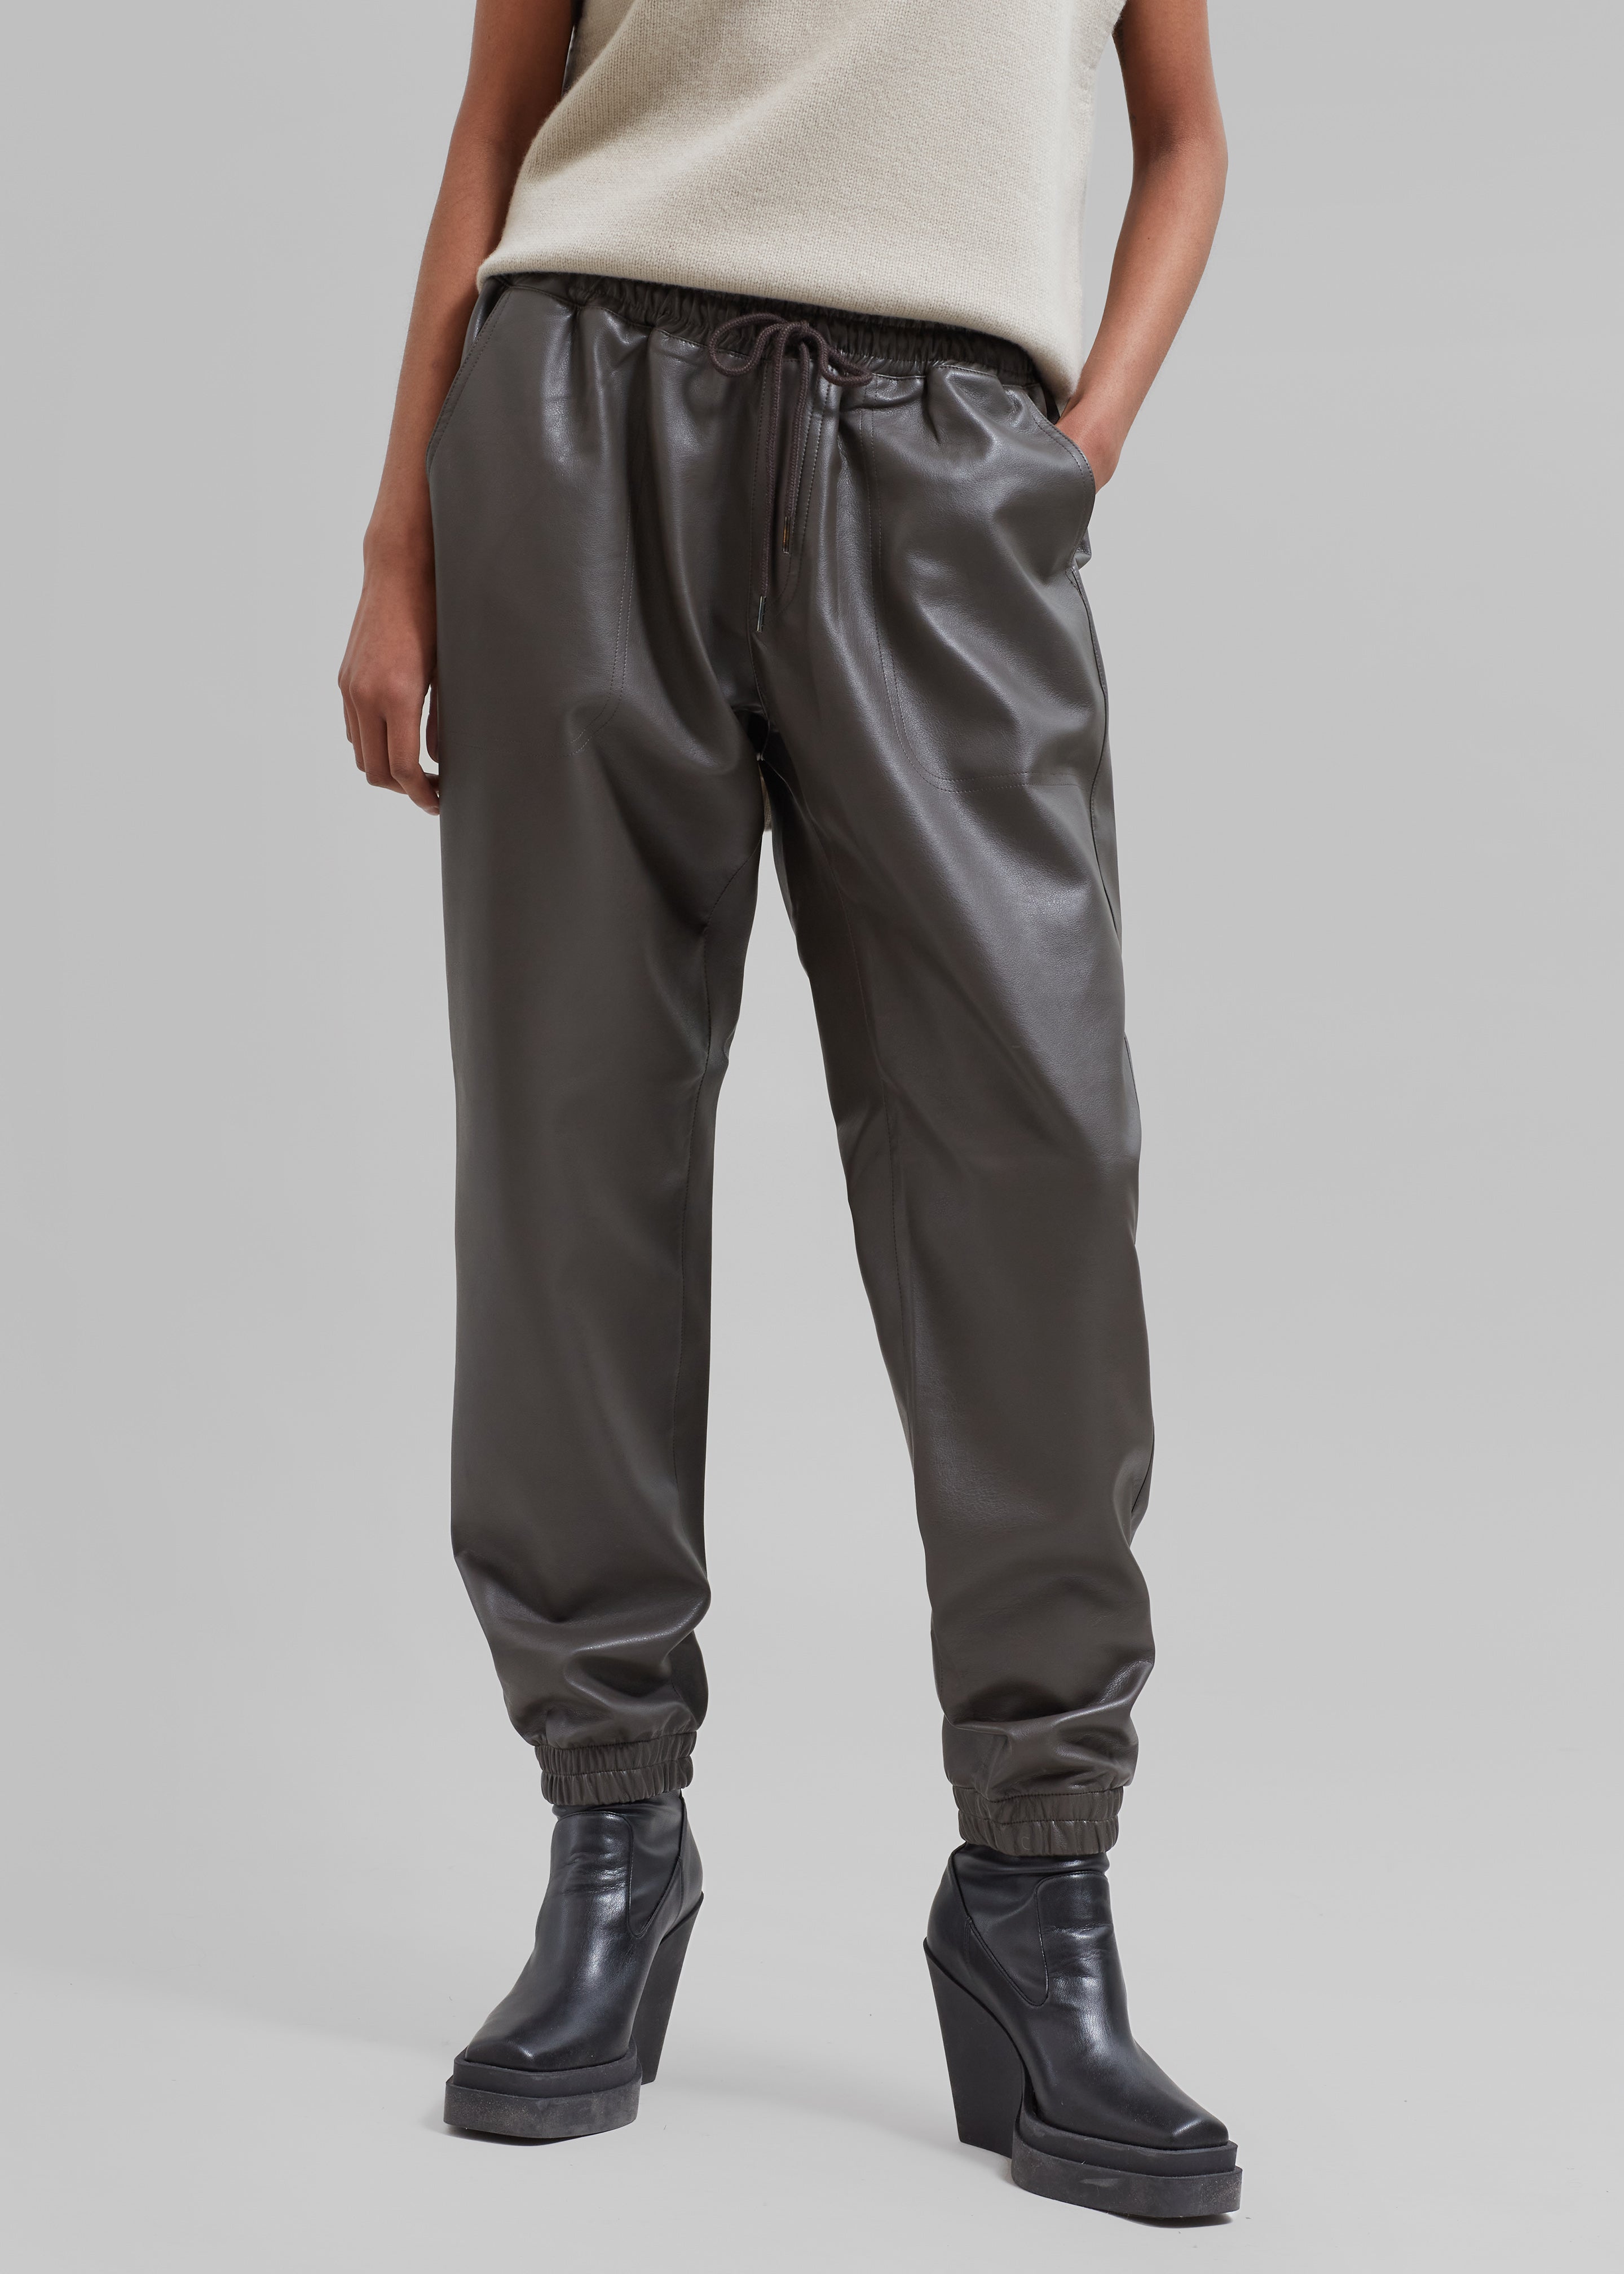 Brighton Faux Leather Joggers - Brown - 2